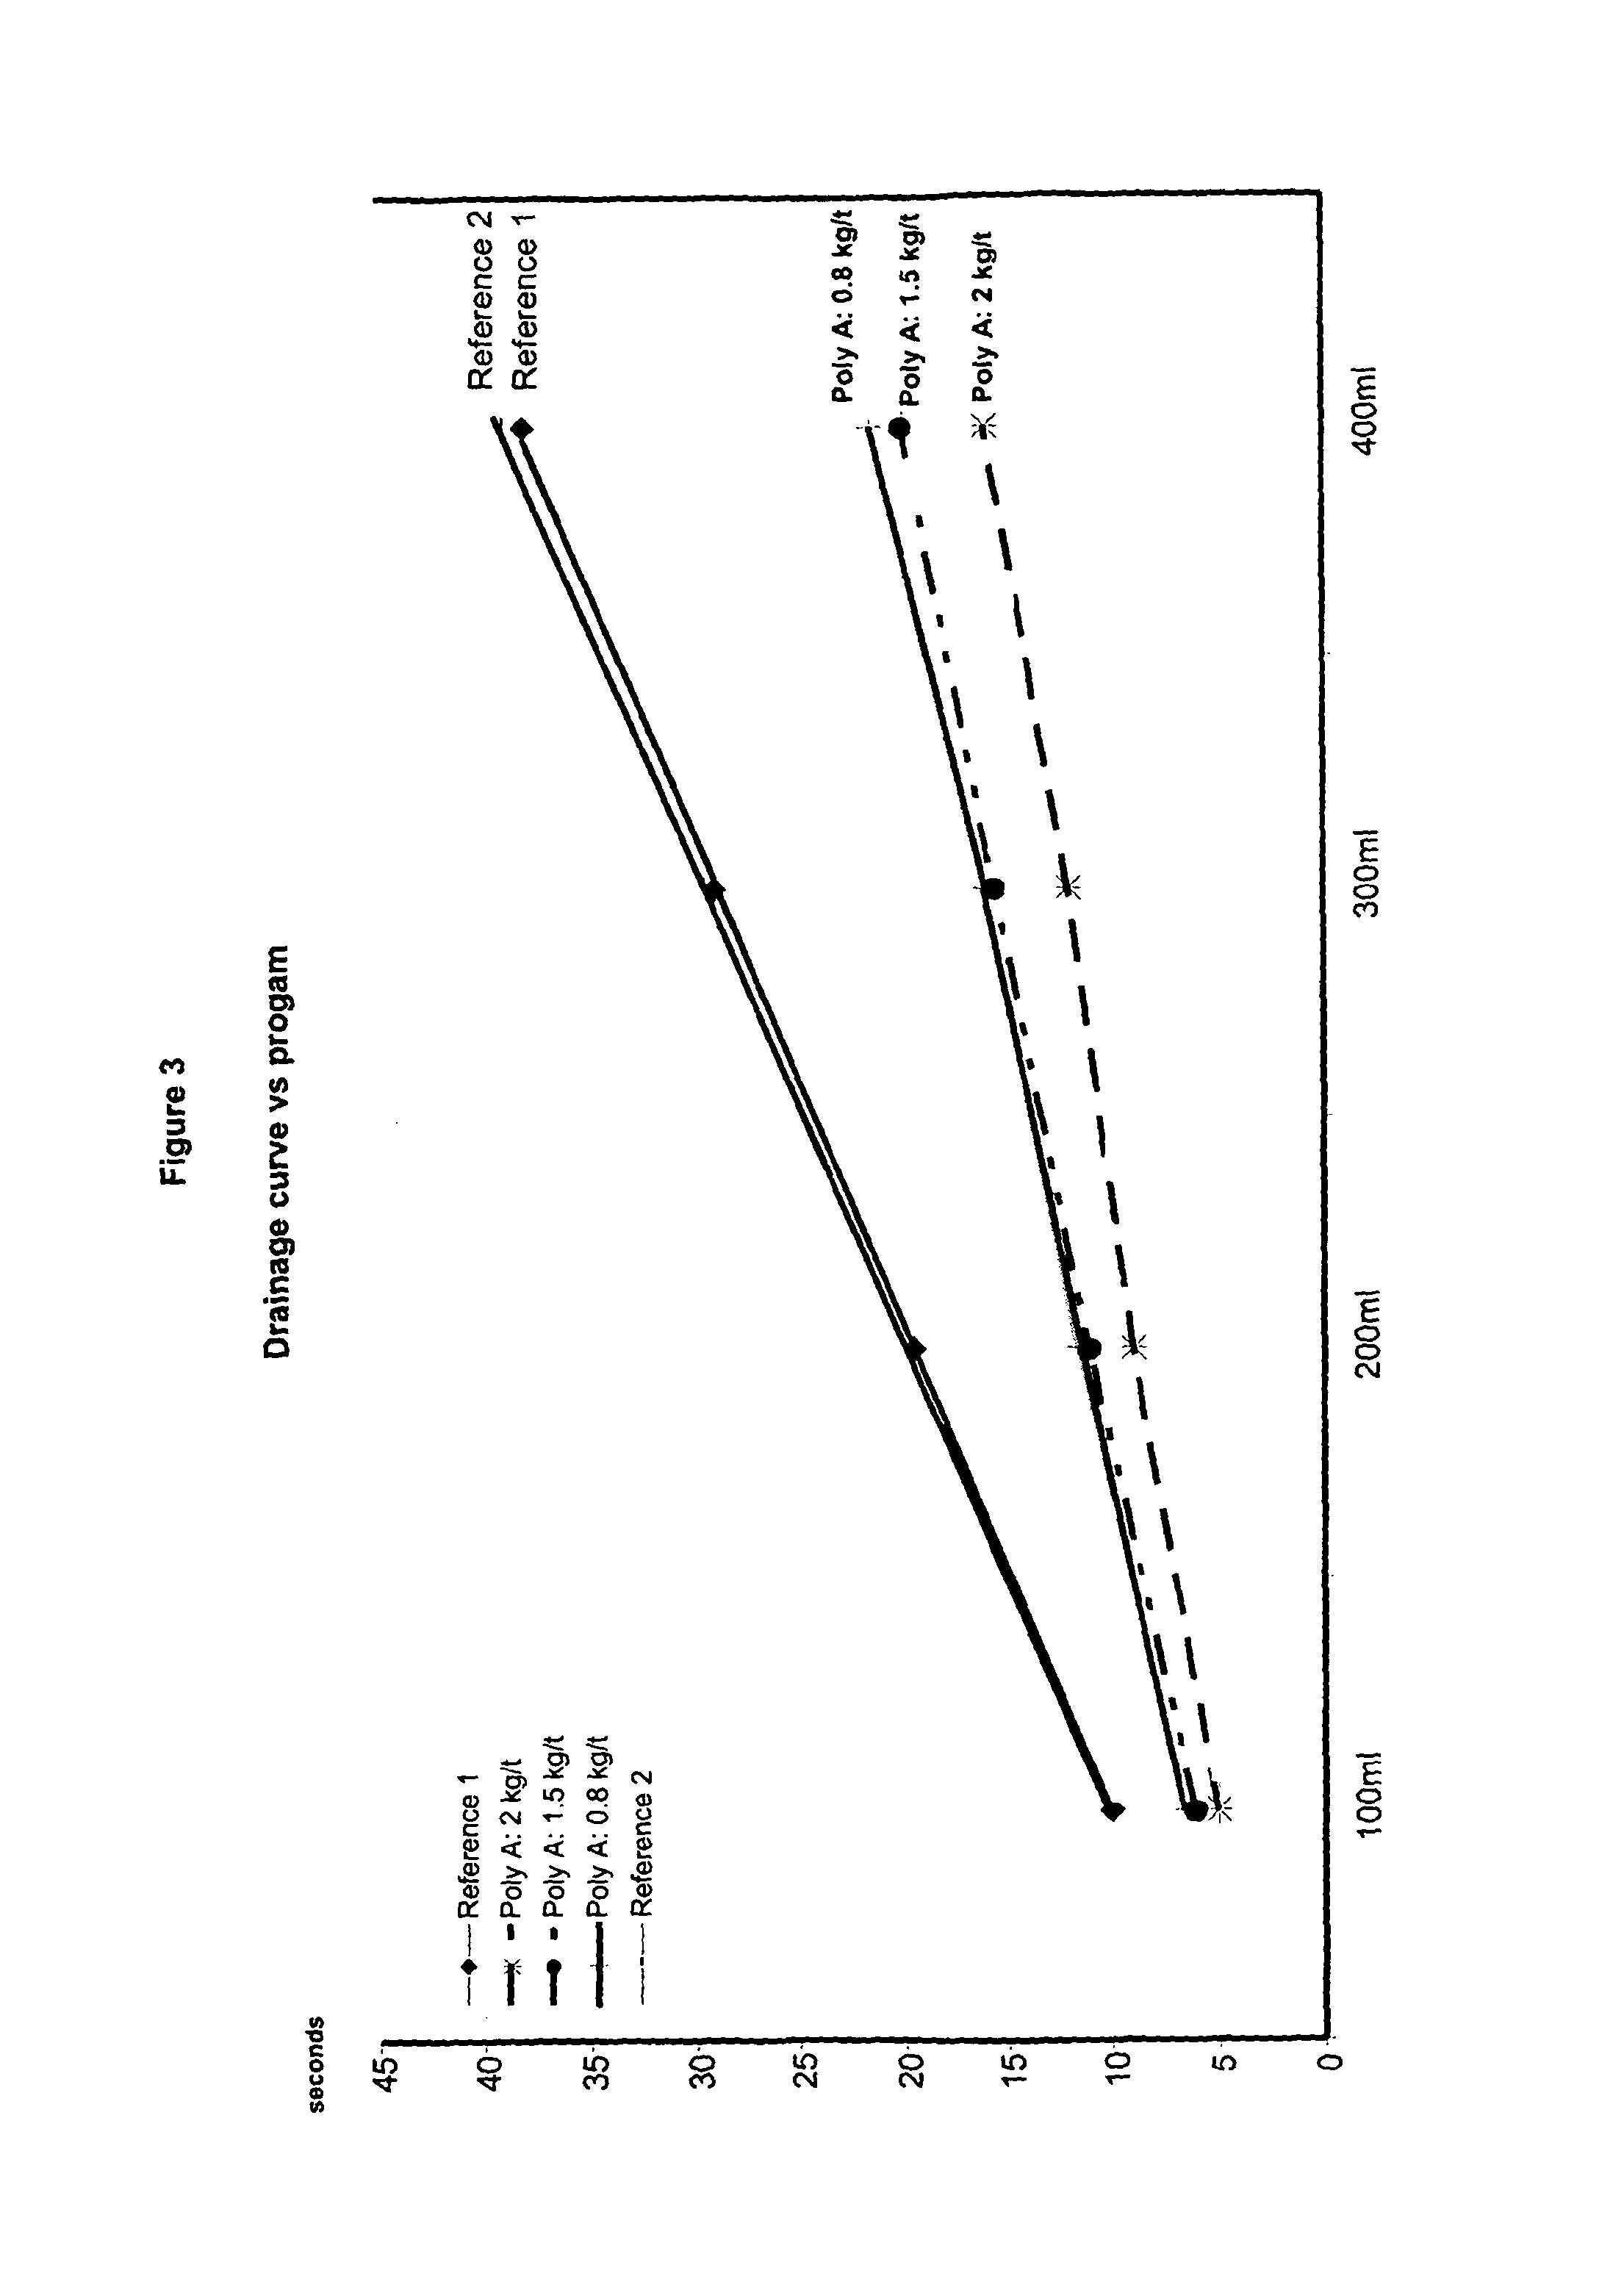 Method for increasing the advantages of starch in pulped cellulosic material in the production of paper and paperboard